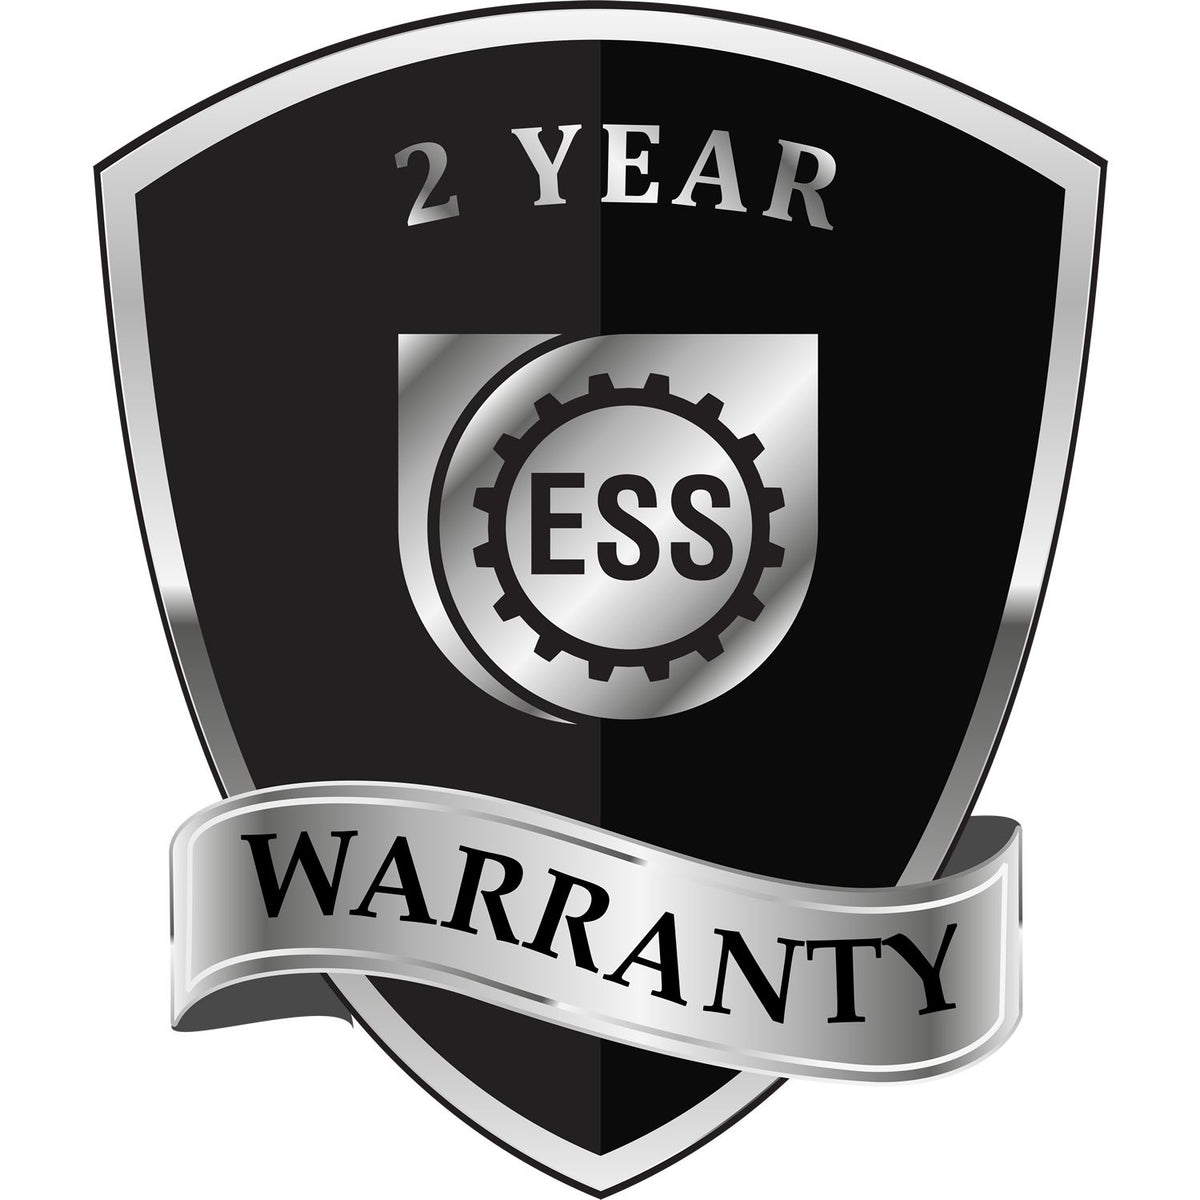 A badge or emblem showing a warranty icon for the Heavy Duty Cast Iron North Carolina Engineer Seal Embosser